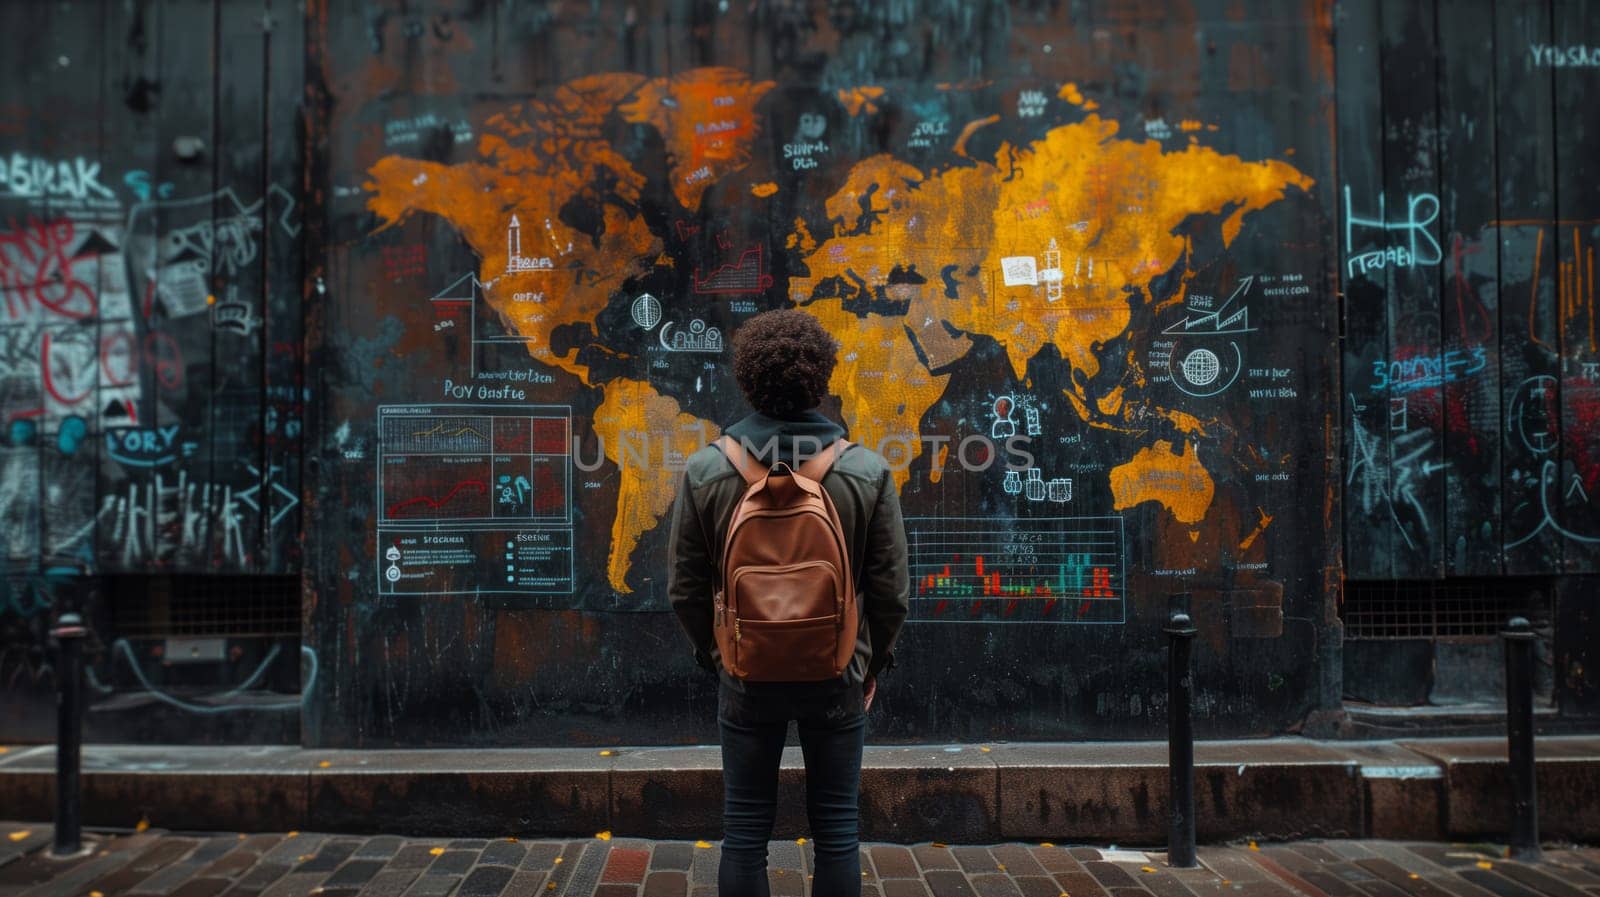 A man with a backpack stands in front of a world map mural on a city wall by richwolf